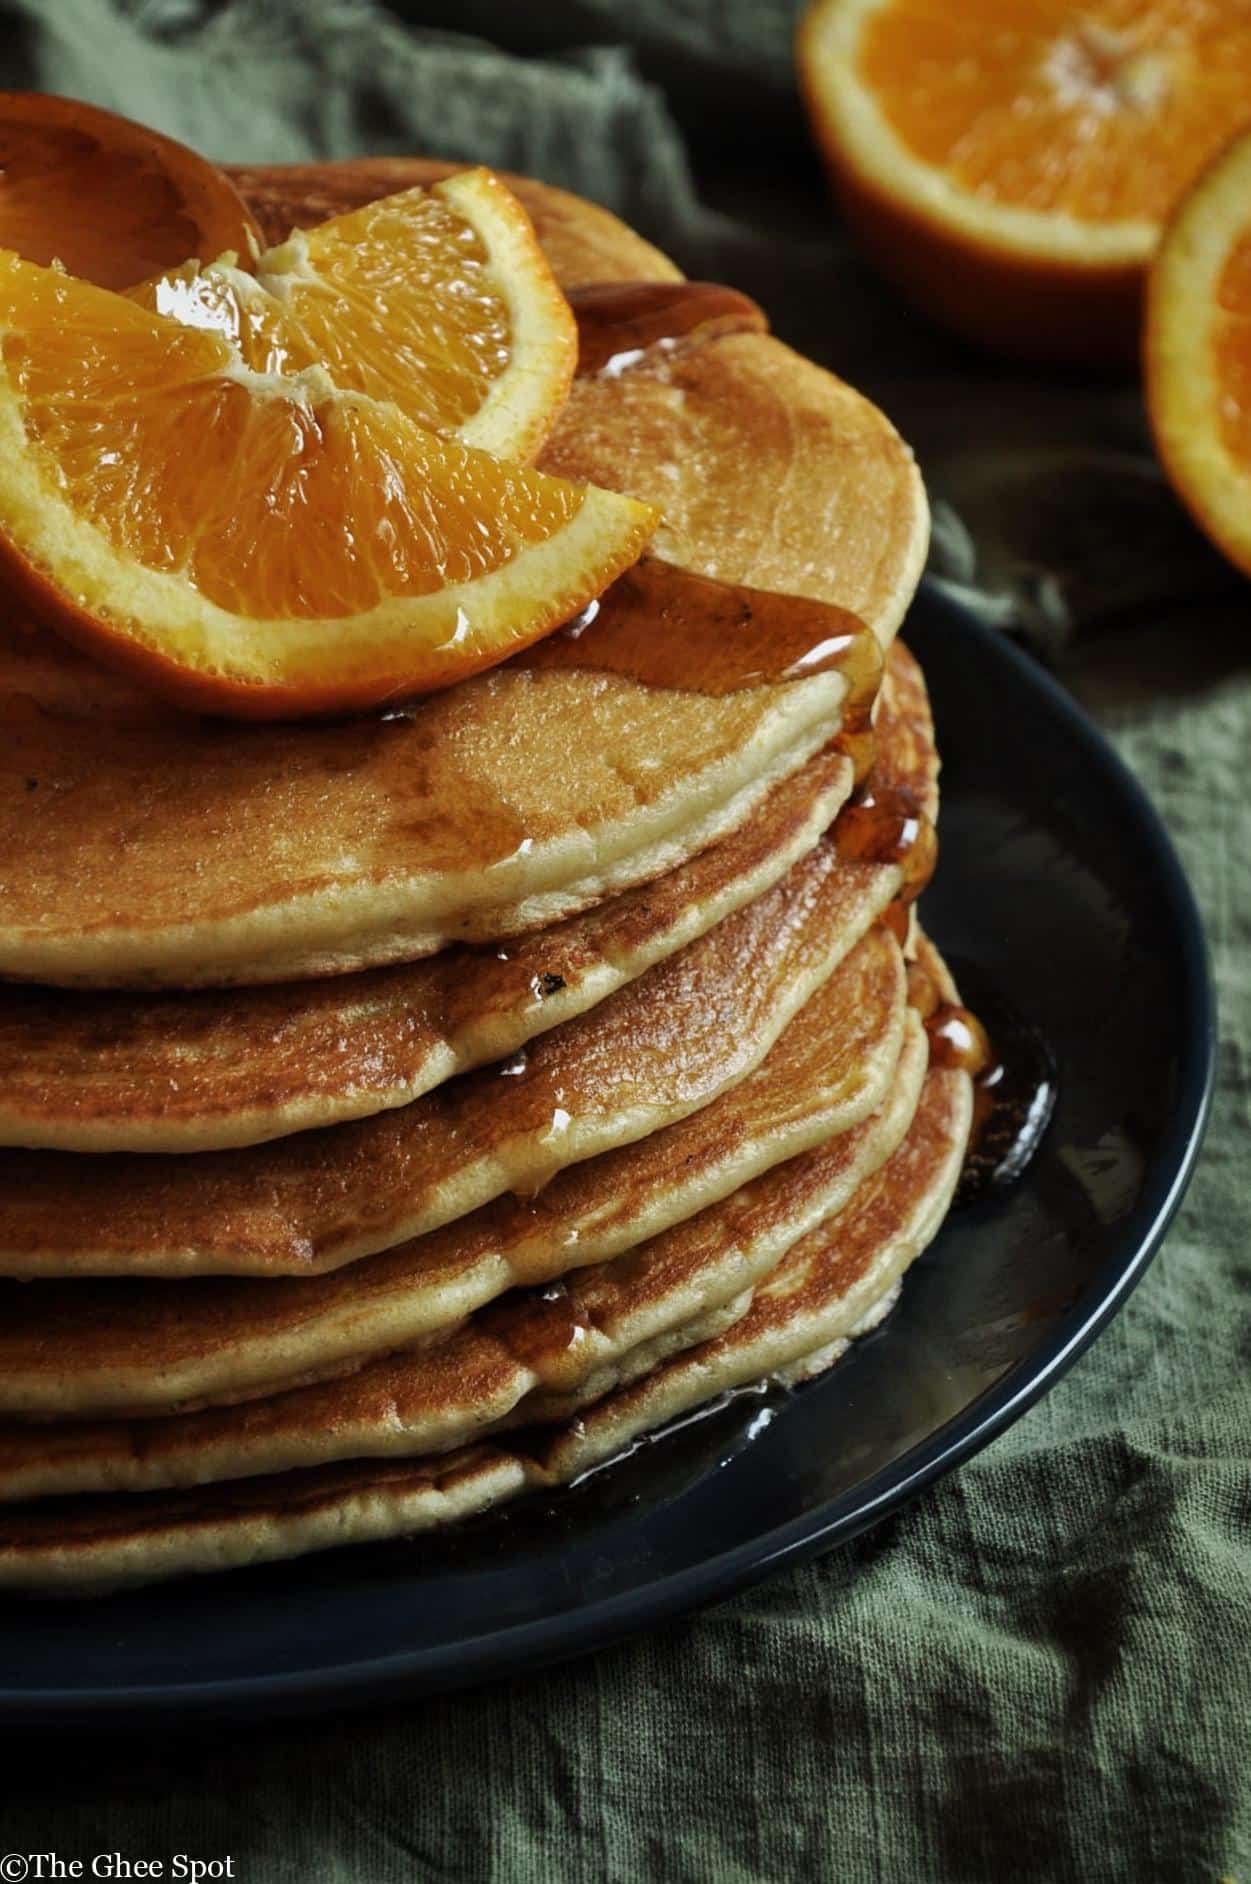 fresh orange juice and cardamom make these pancakes light and delicious.